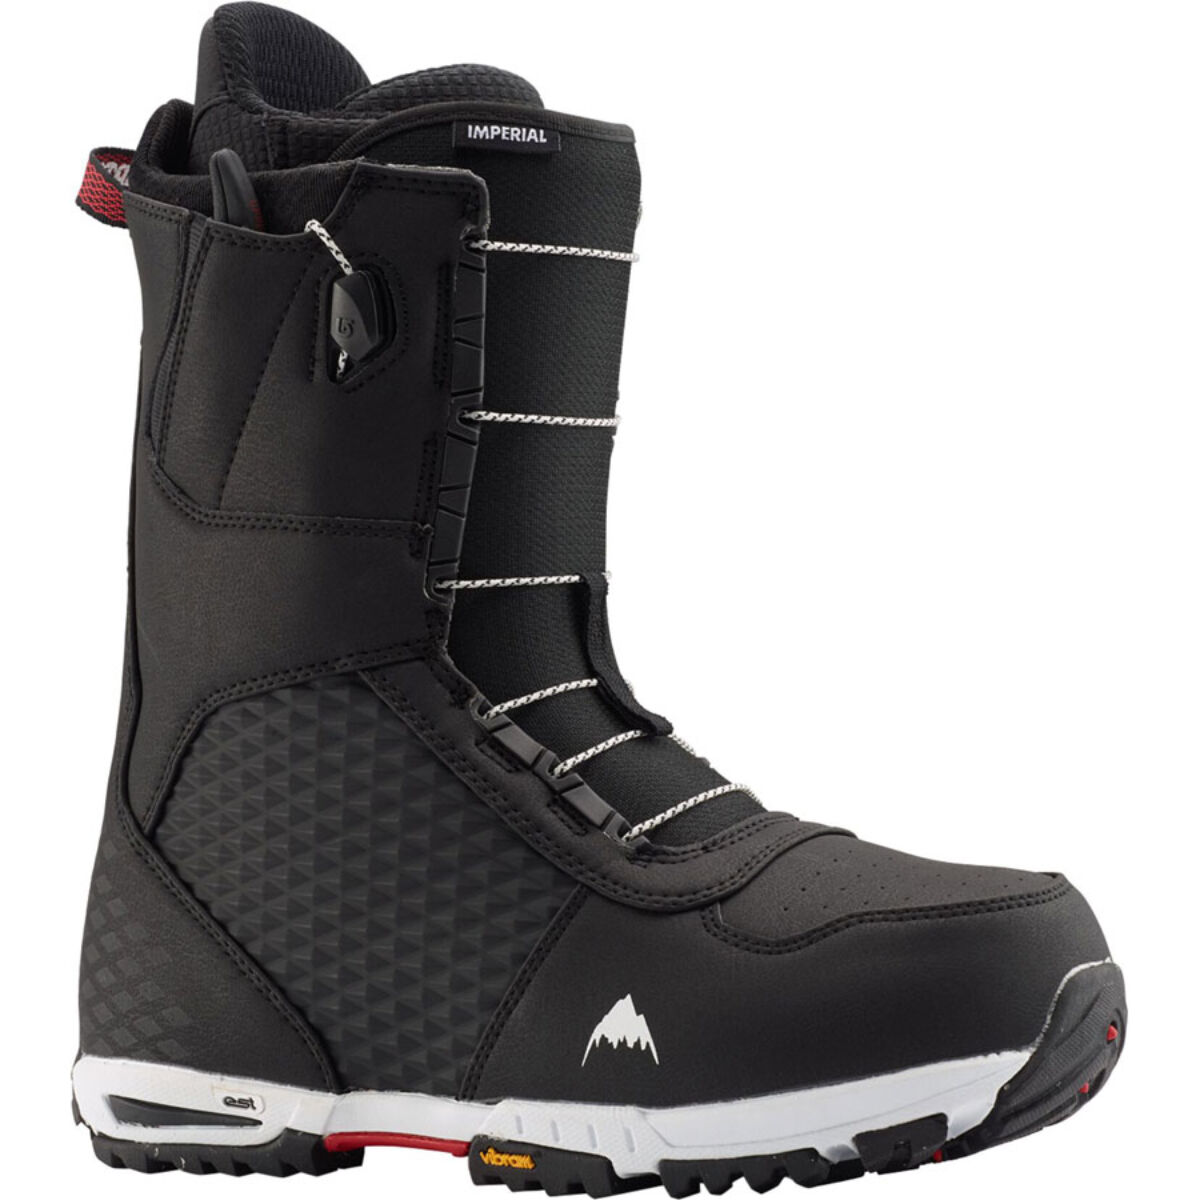 Burton Imperial Snowboard Boots Mens | Christy Sports